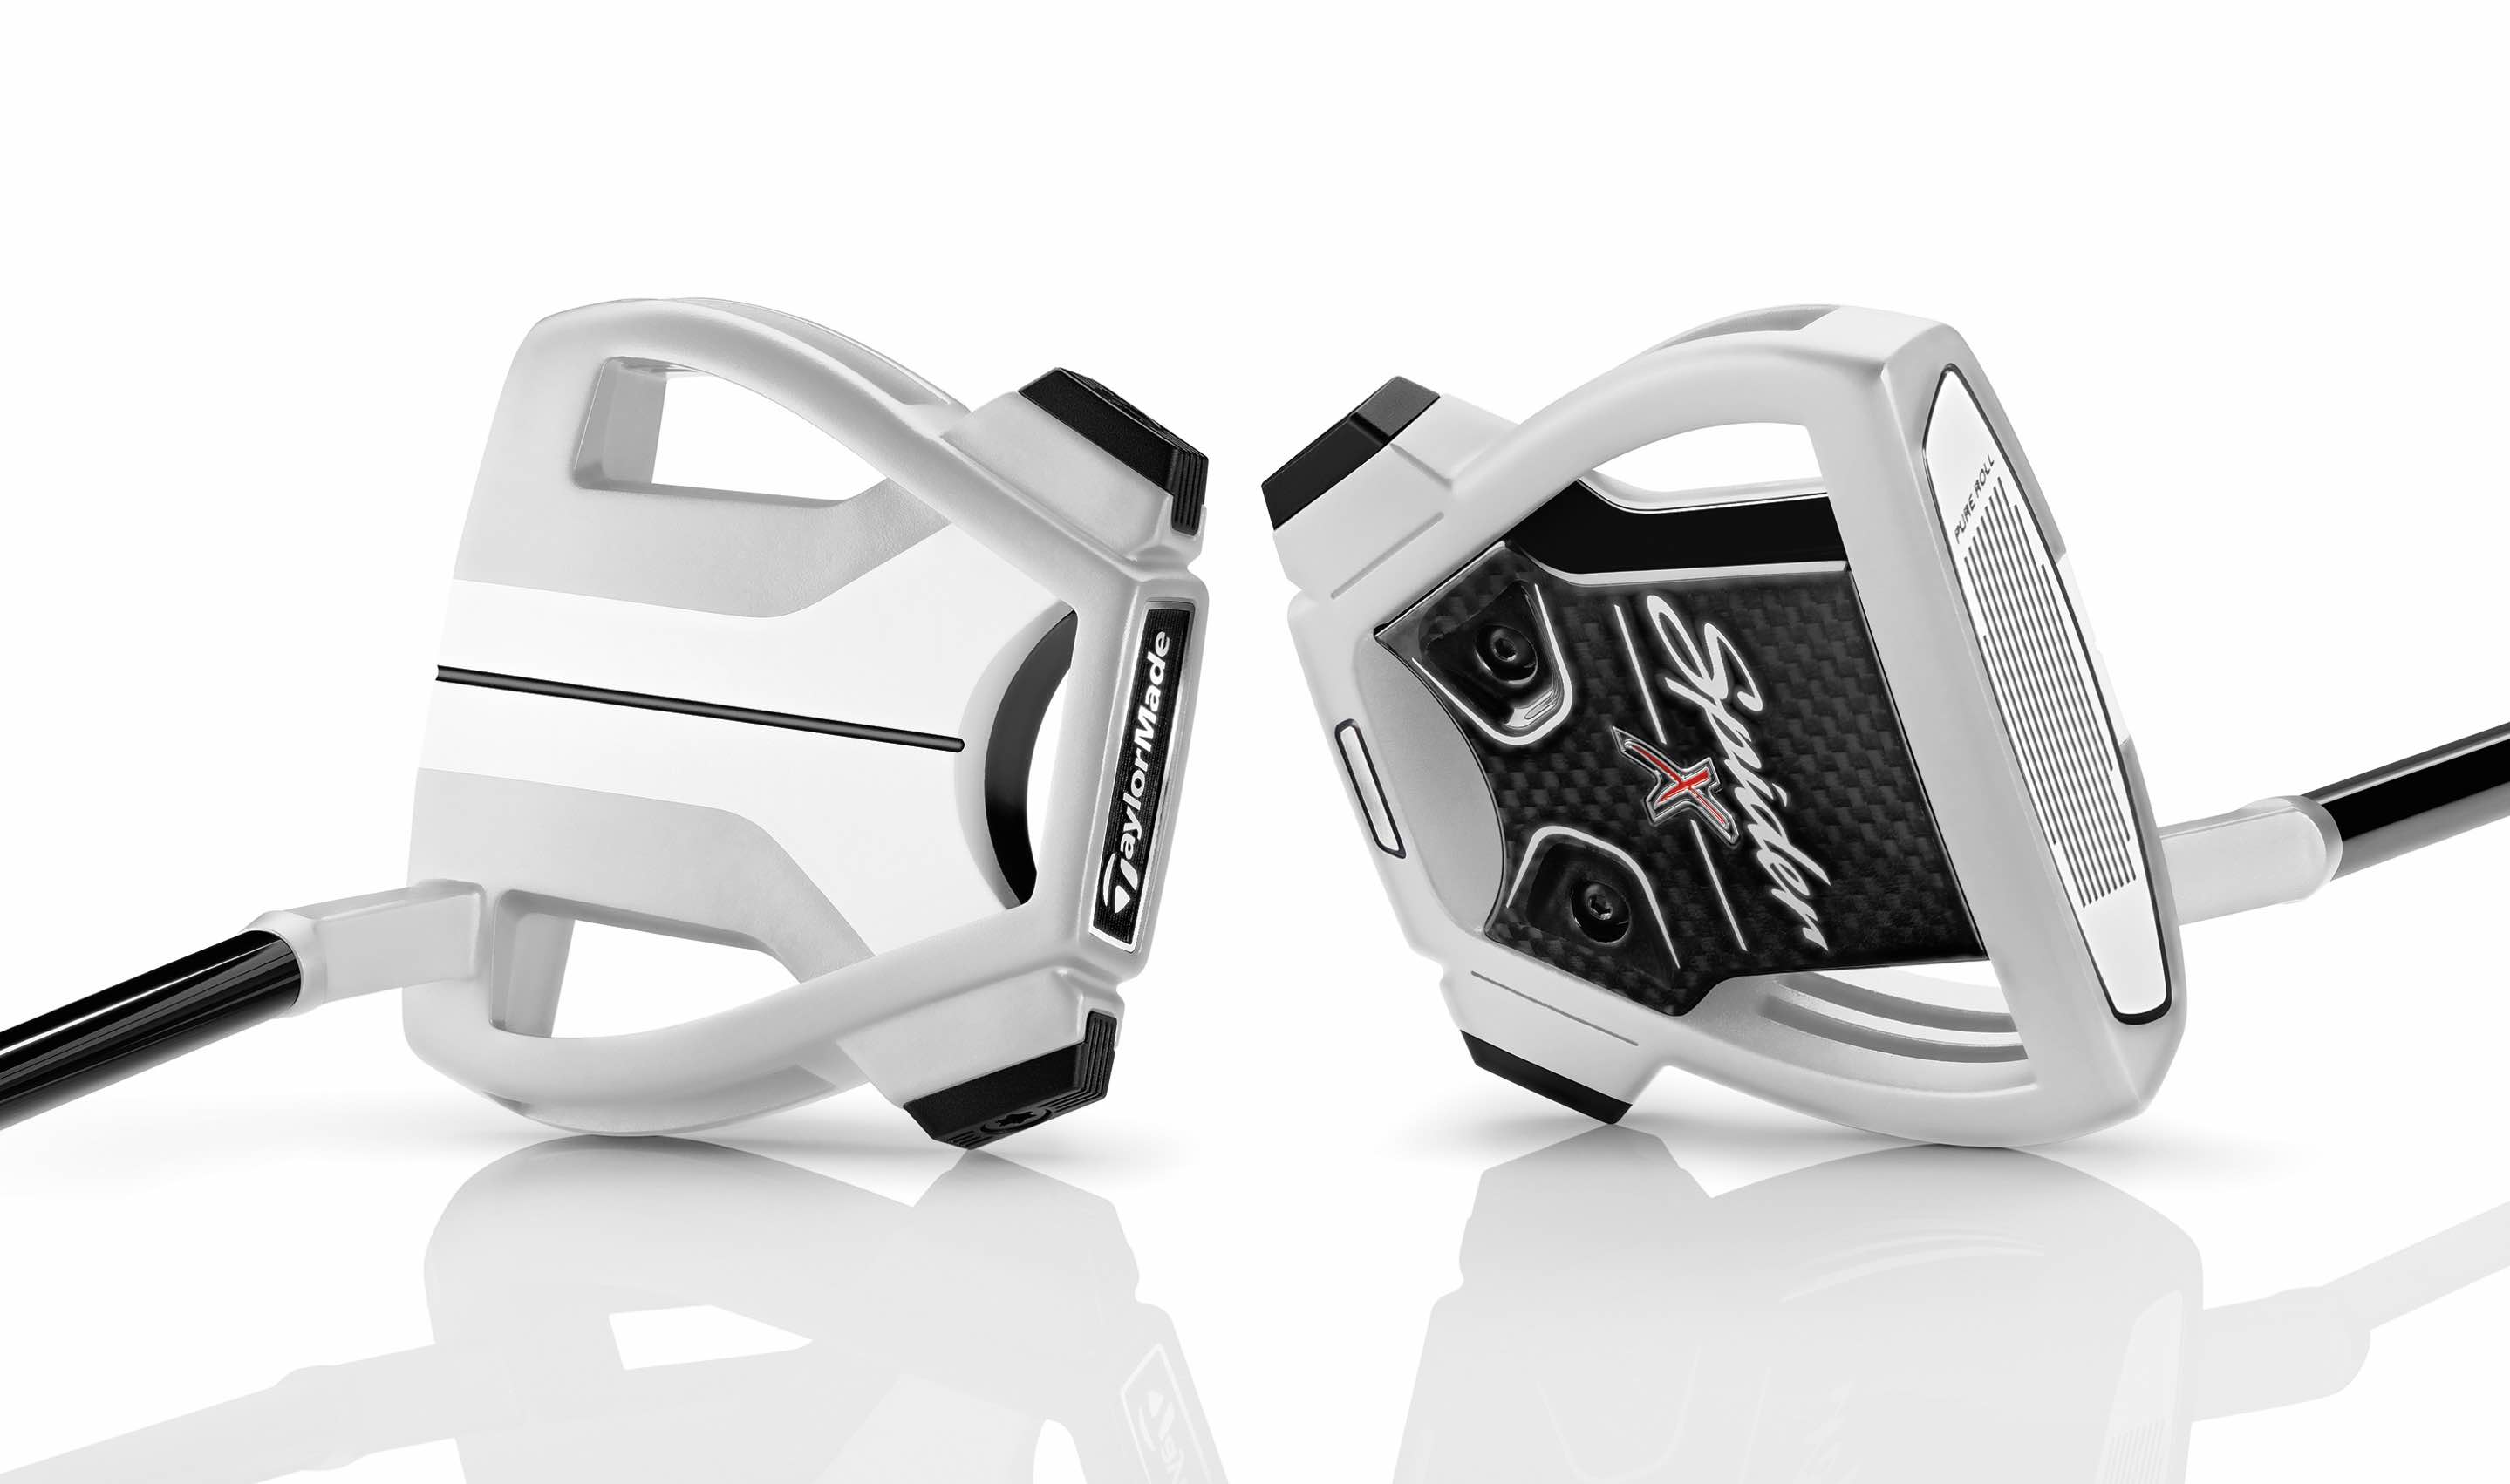 A powerhouse putter with a sleek new color